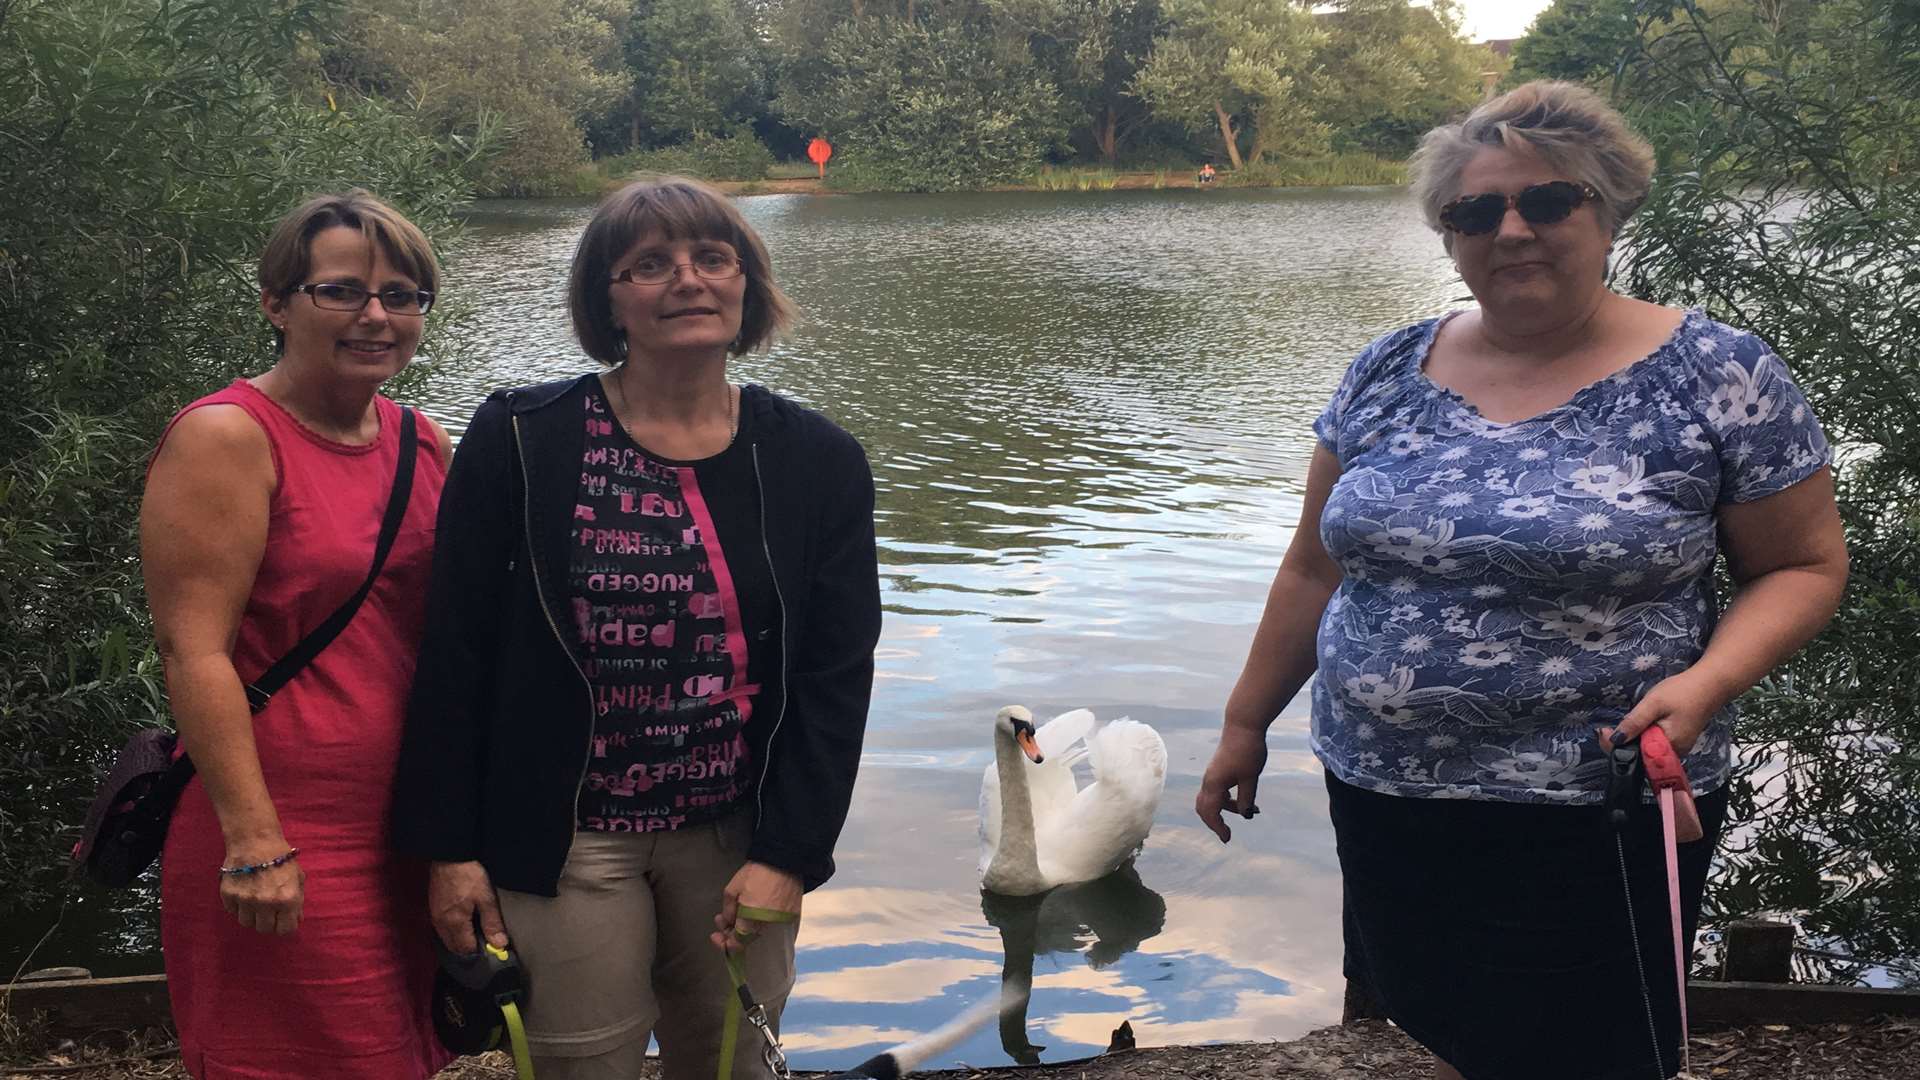 The women who helped save the swan: Sarah O'Keefe, RSPB volunteer Anna, and Velta Lacis